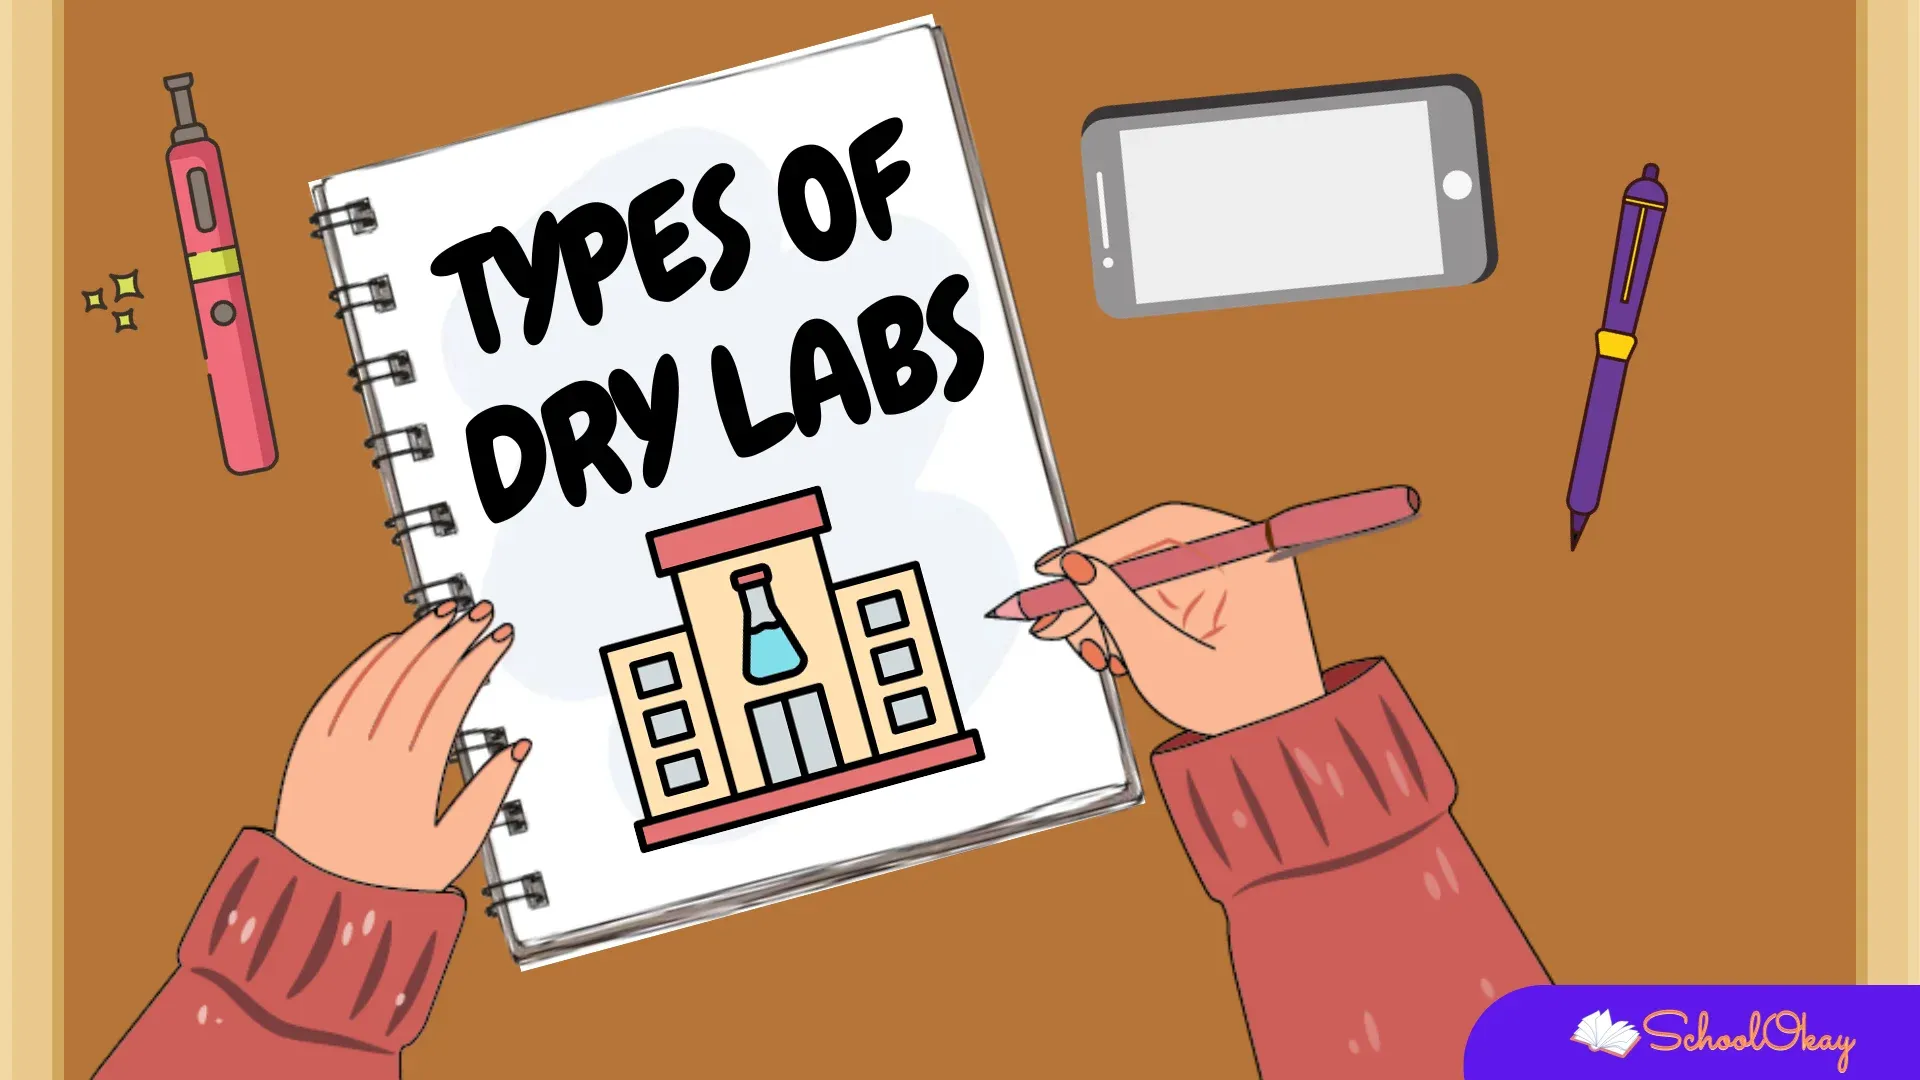 Types of dry labs